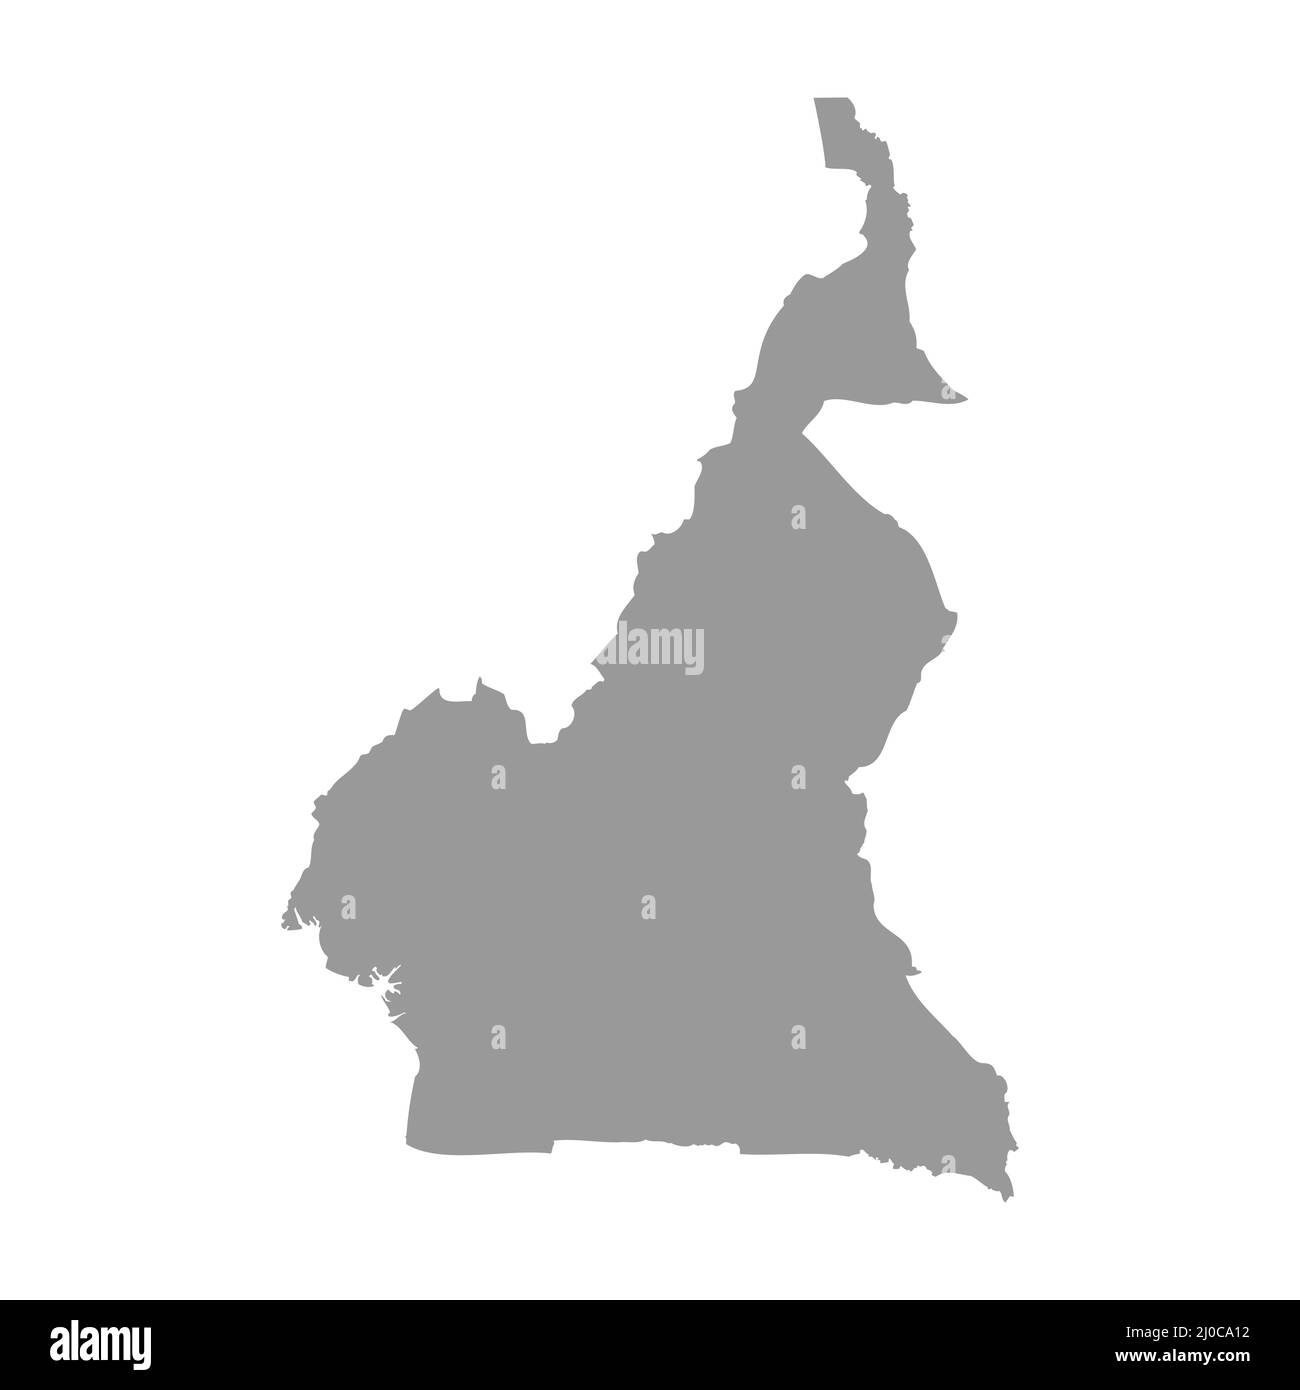 Cameroon map Black and White Stock Photos & Images - Alamy